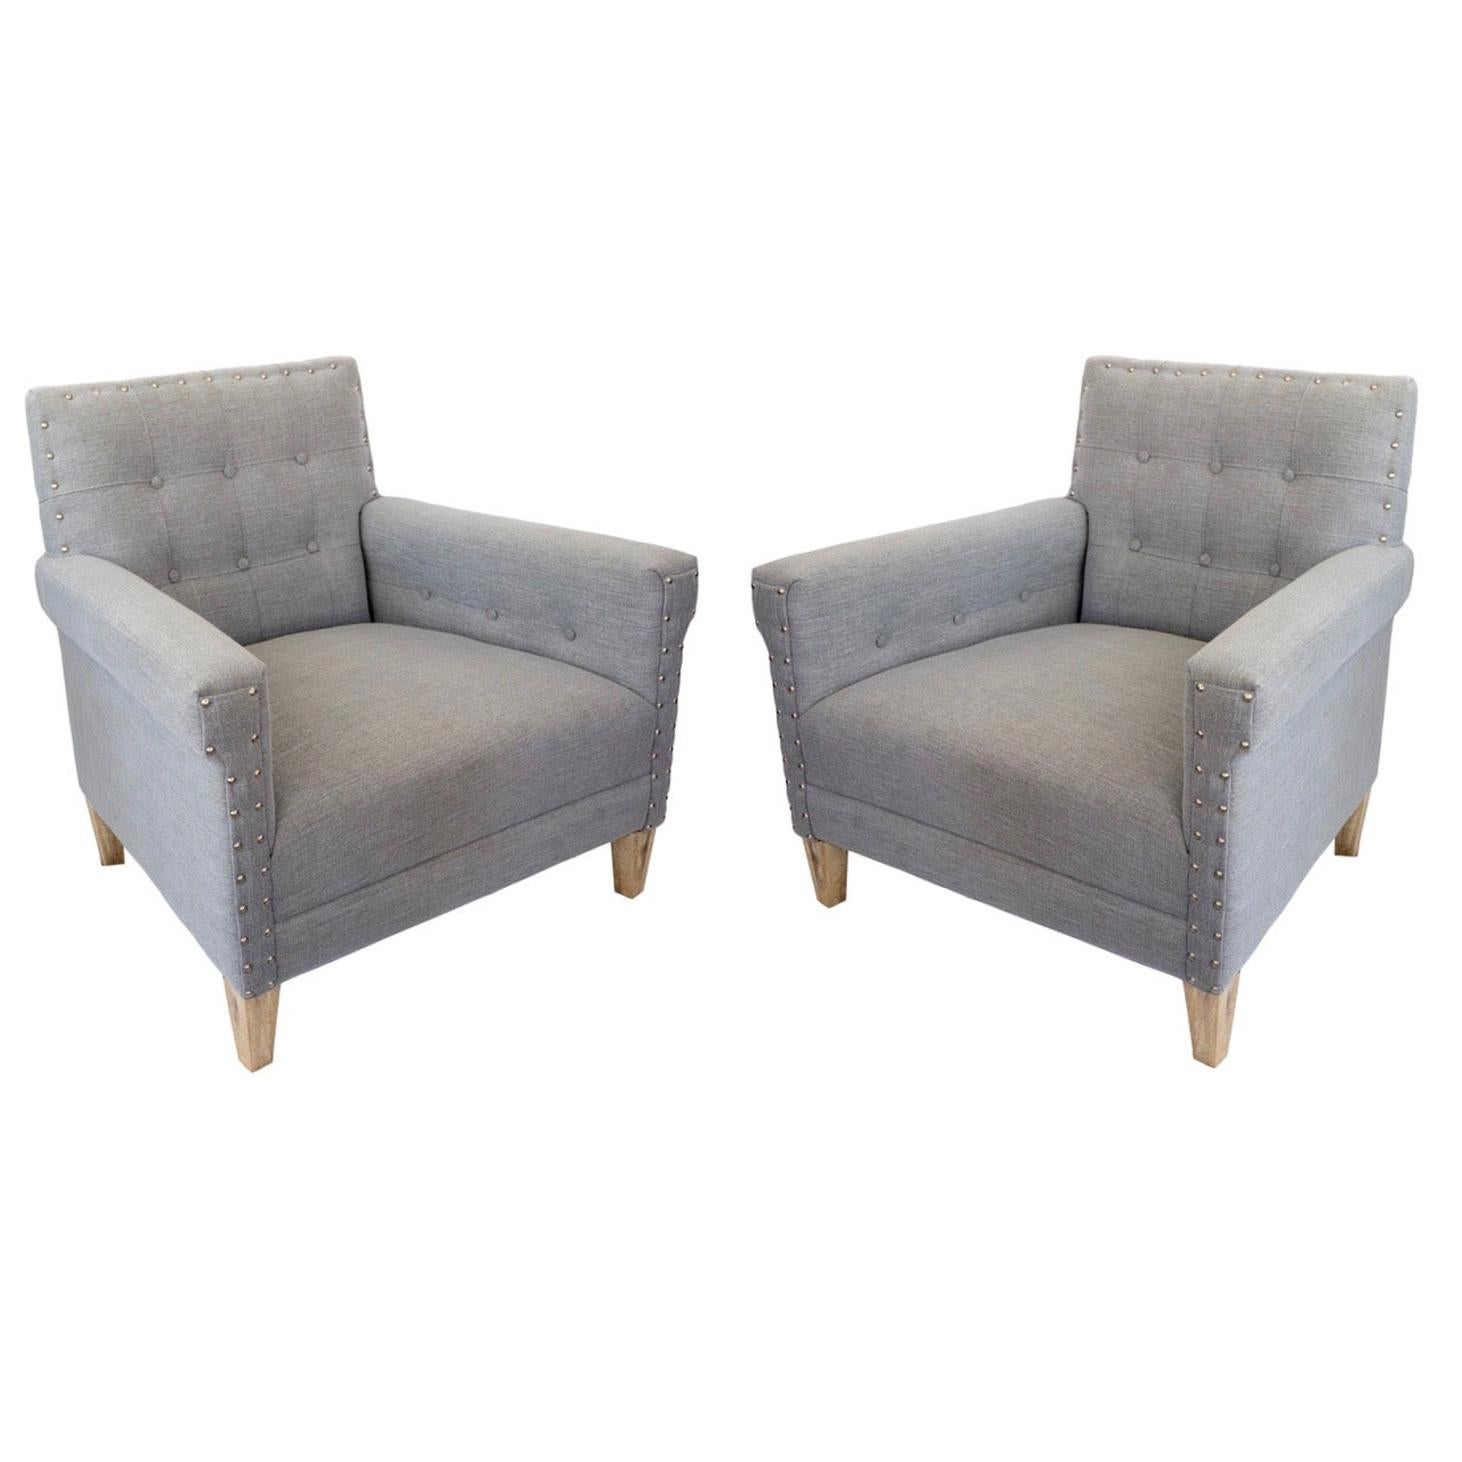 Vintage Jonathan Adler Tufted Lounge Chairs, a Pair